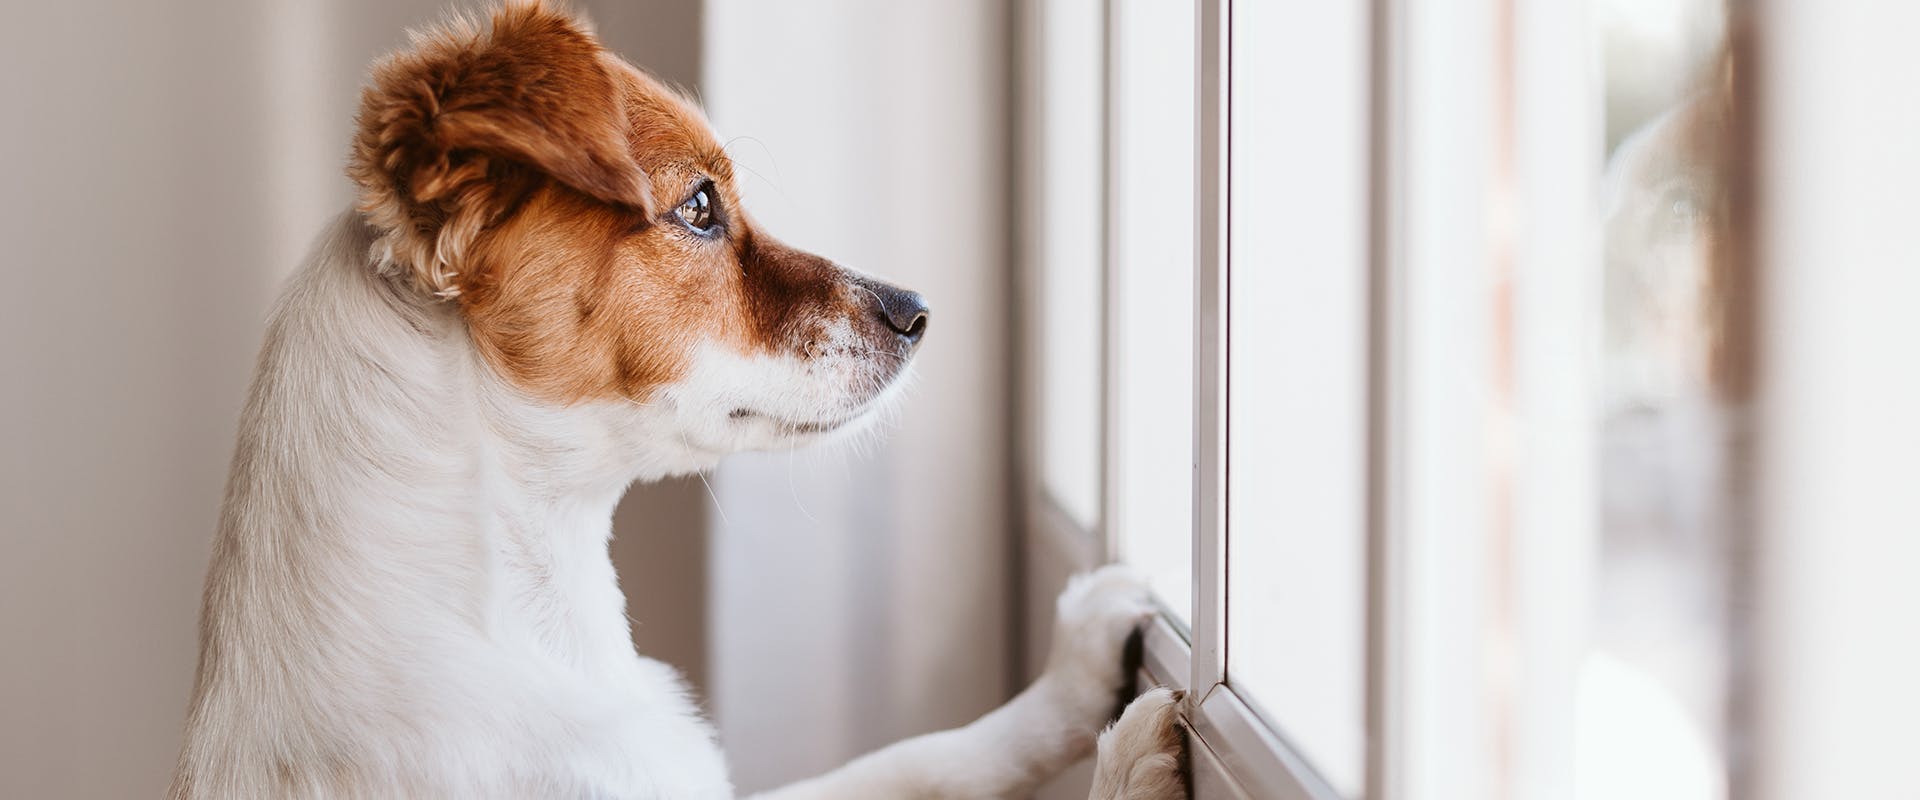 how can you tell if your dog is depressed or lonely